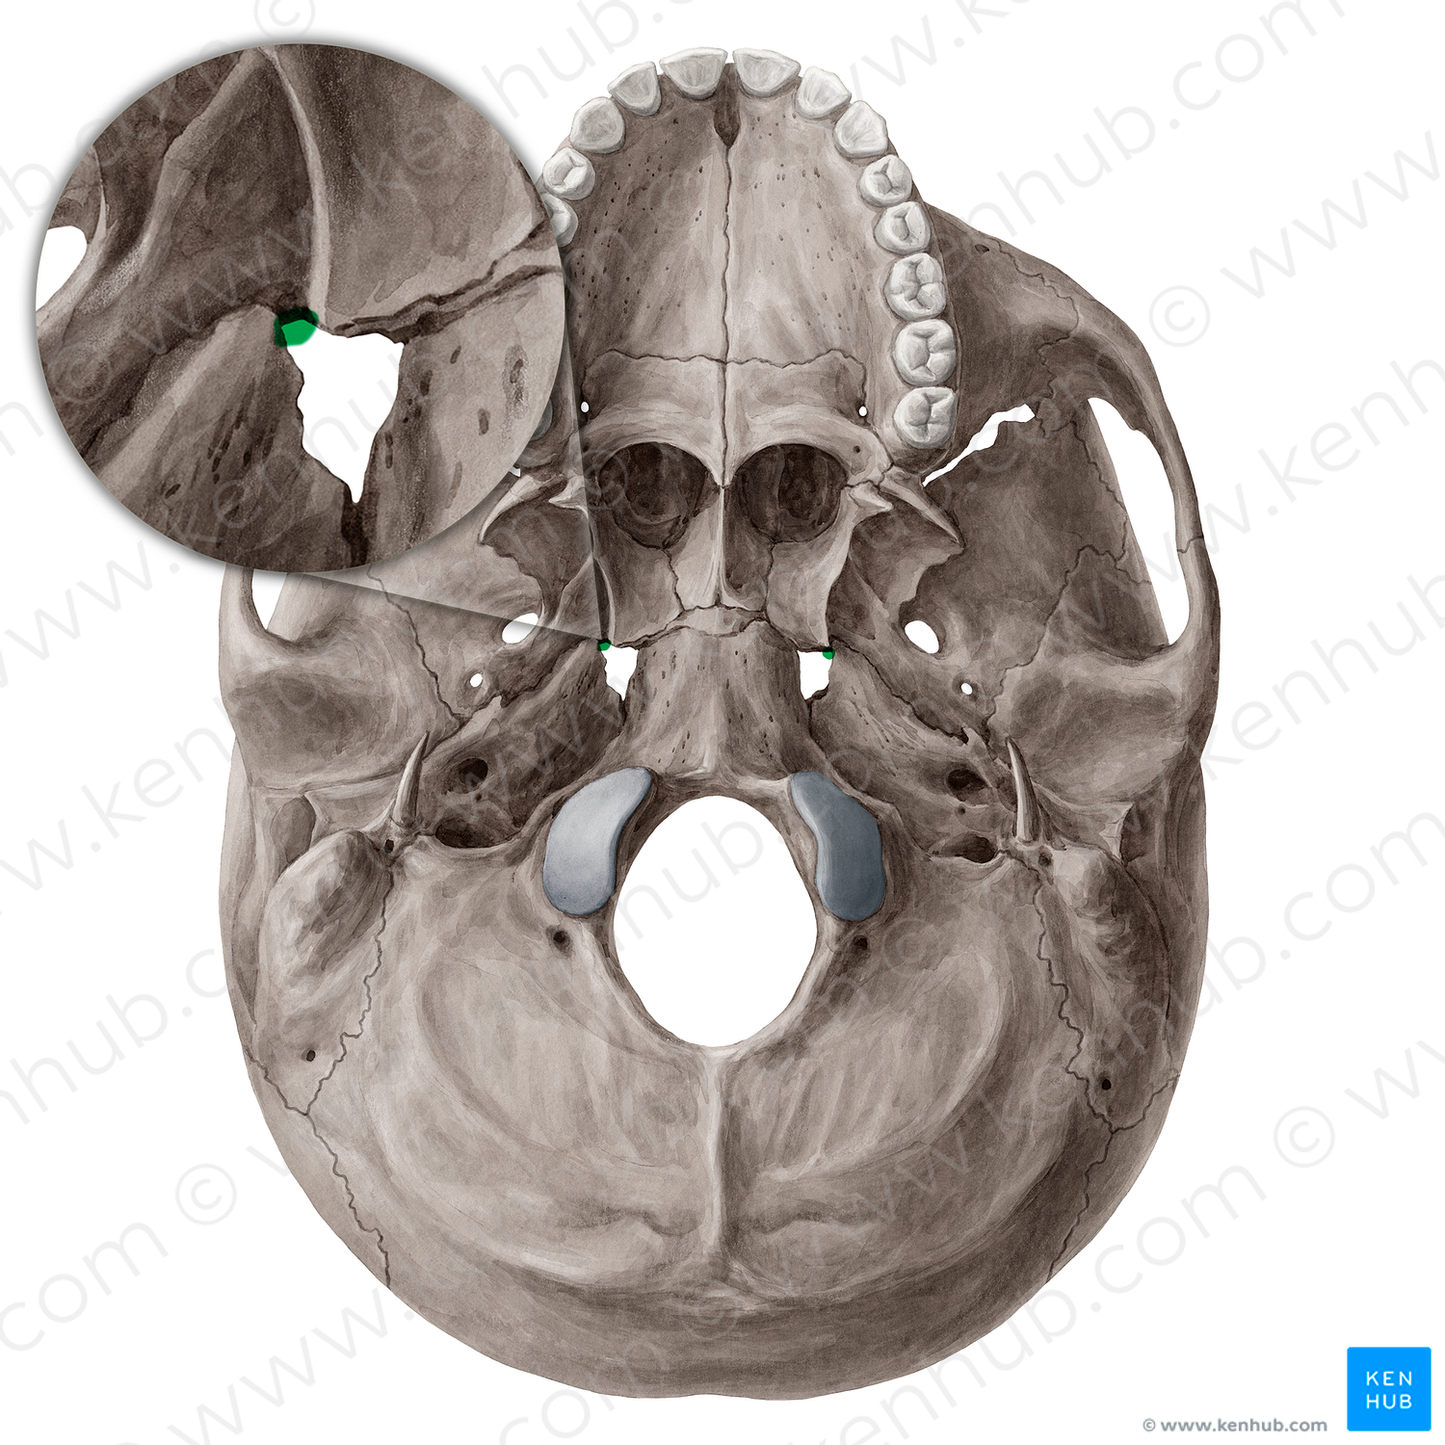 Pterygoid canal (#21538)